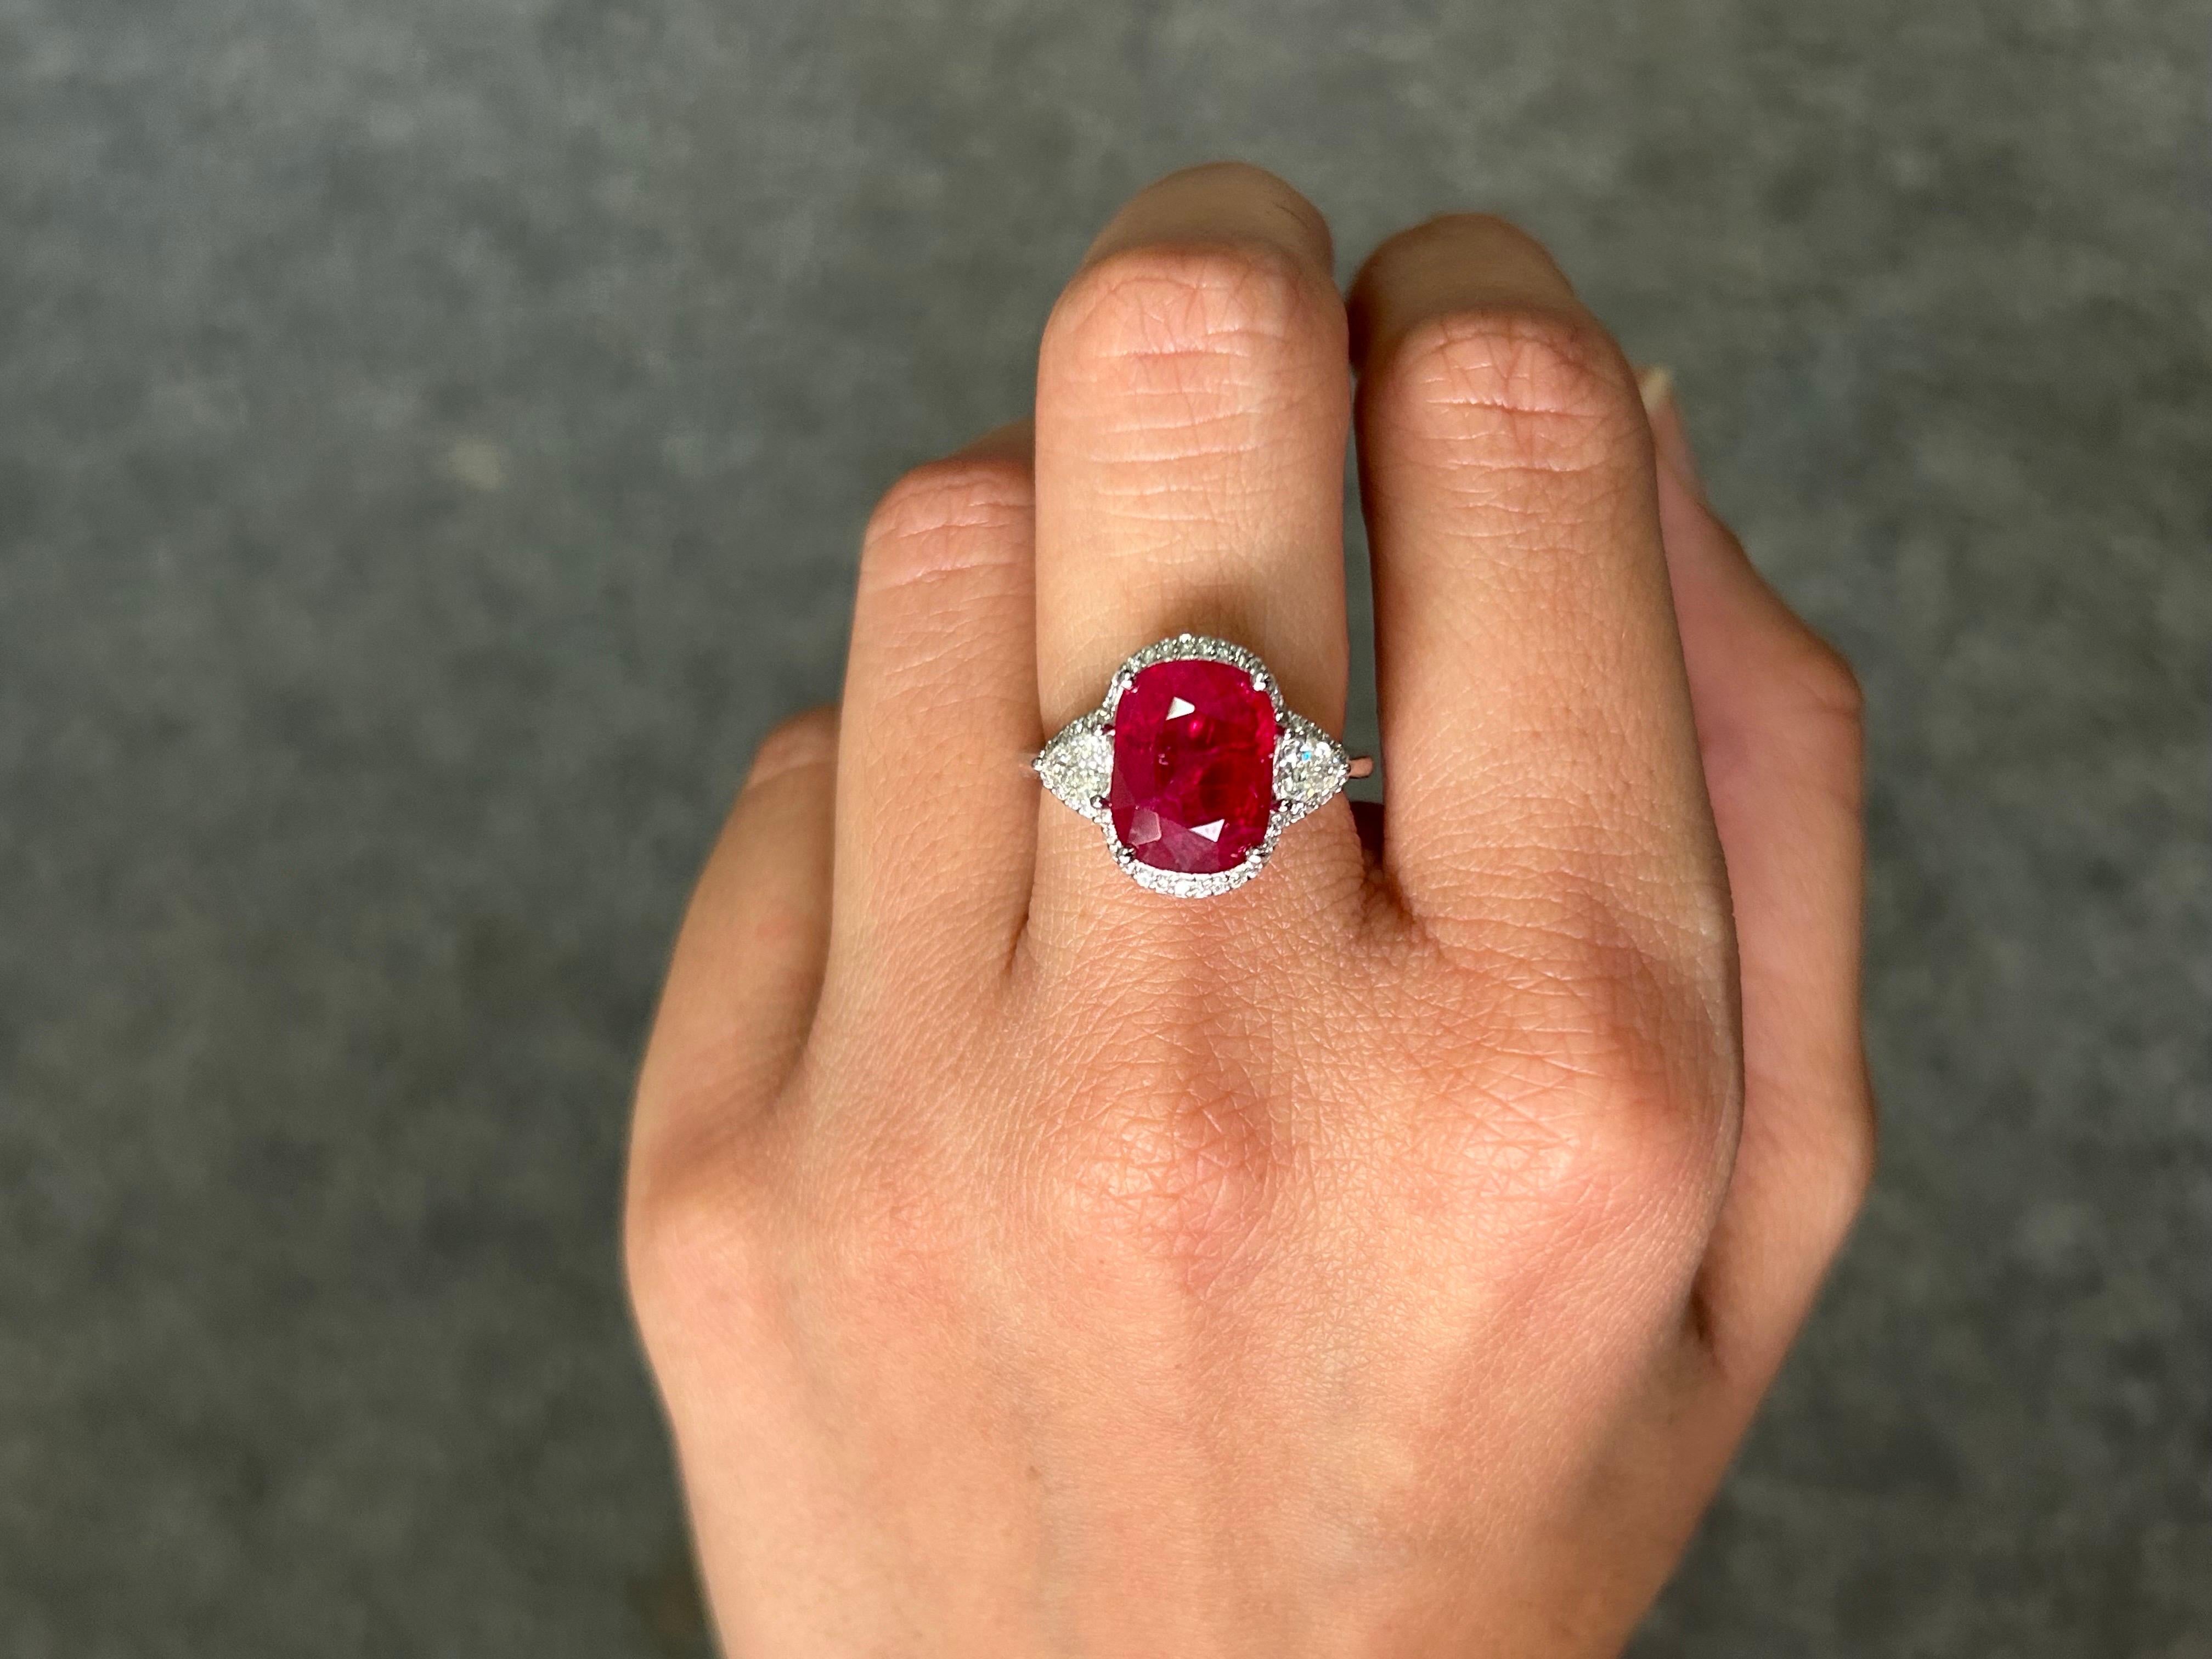 A stunning, one of a kind 5.09 carat oval shaped heated Burmese Ruby center stone with 0.44 carat VS quality side stones White Diamonds and 0.22 carat diamonds halo around it. The Ruby is of an ideal vivid red color, with a great luster and shine to